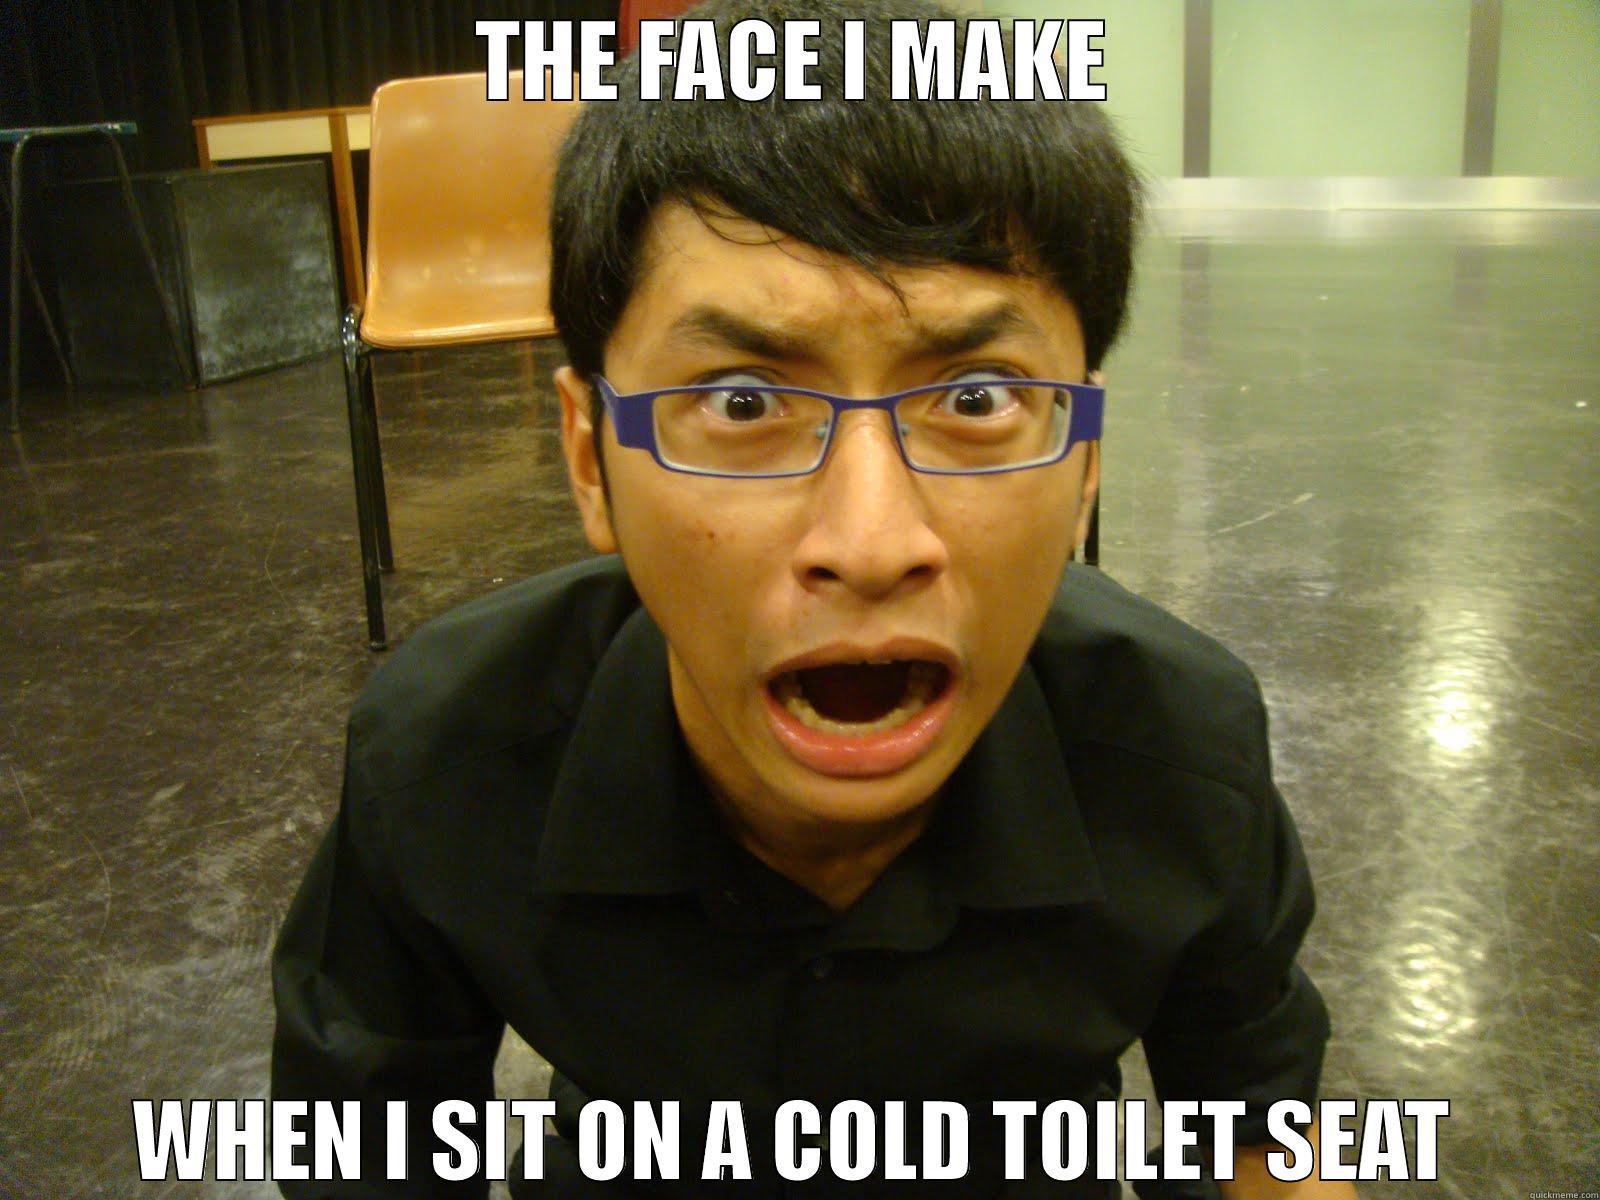 funny face - THE FACE I MAKE WHEN I SIT ON A COLD TOILET SEAT Misc